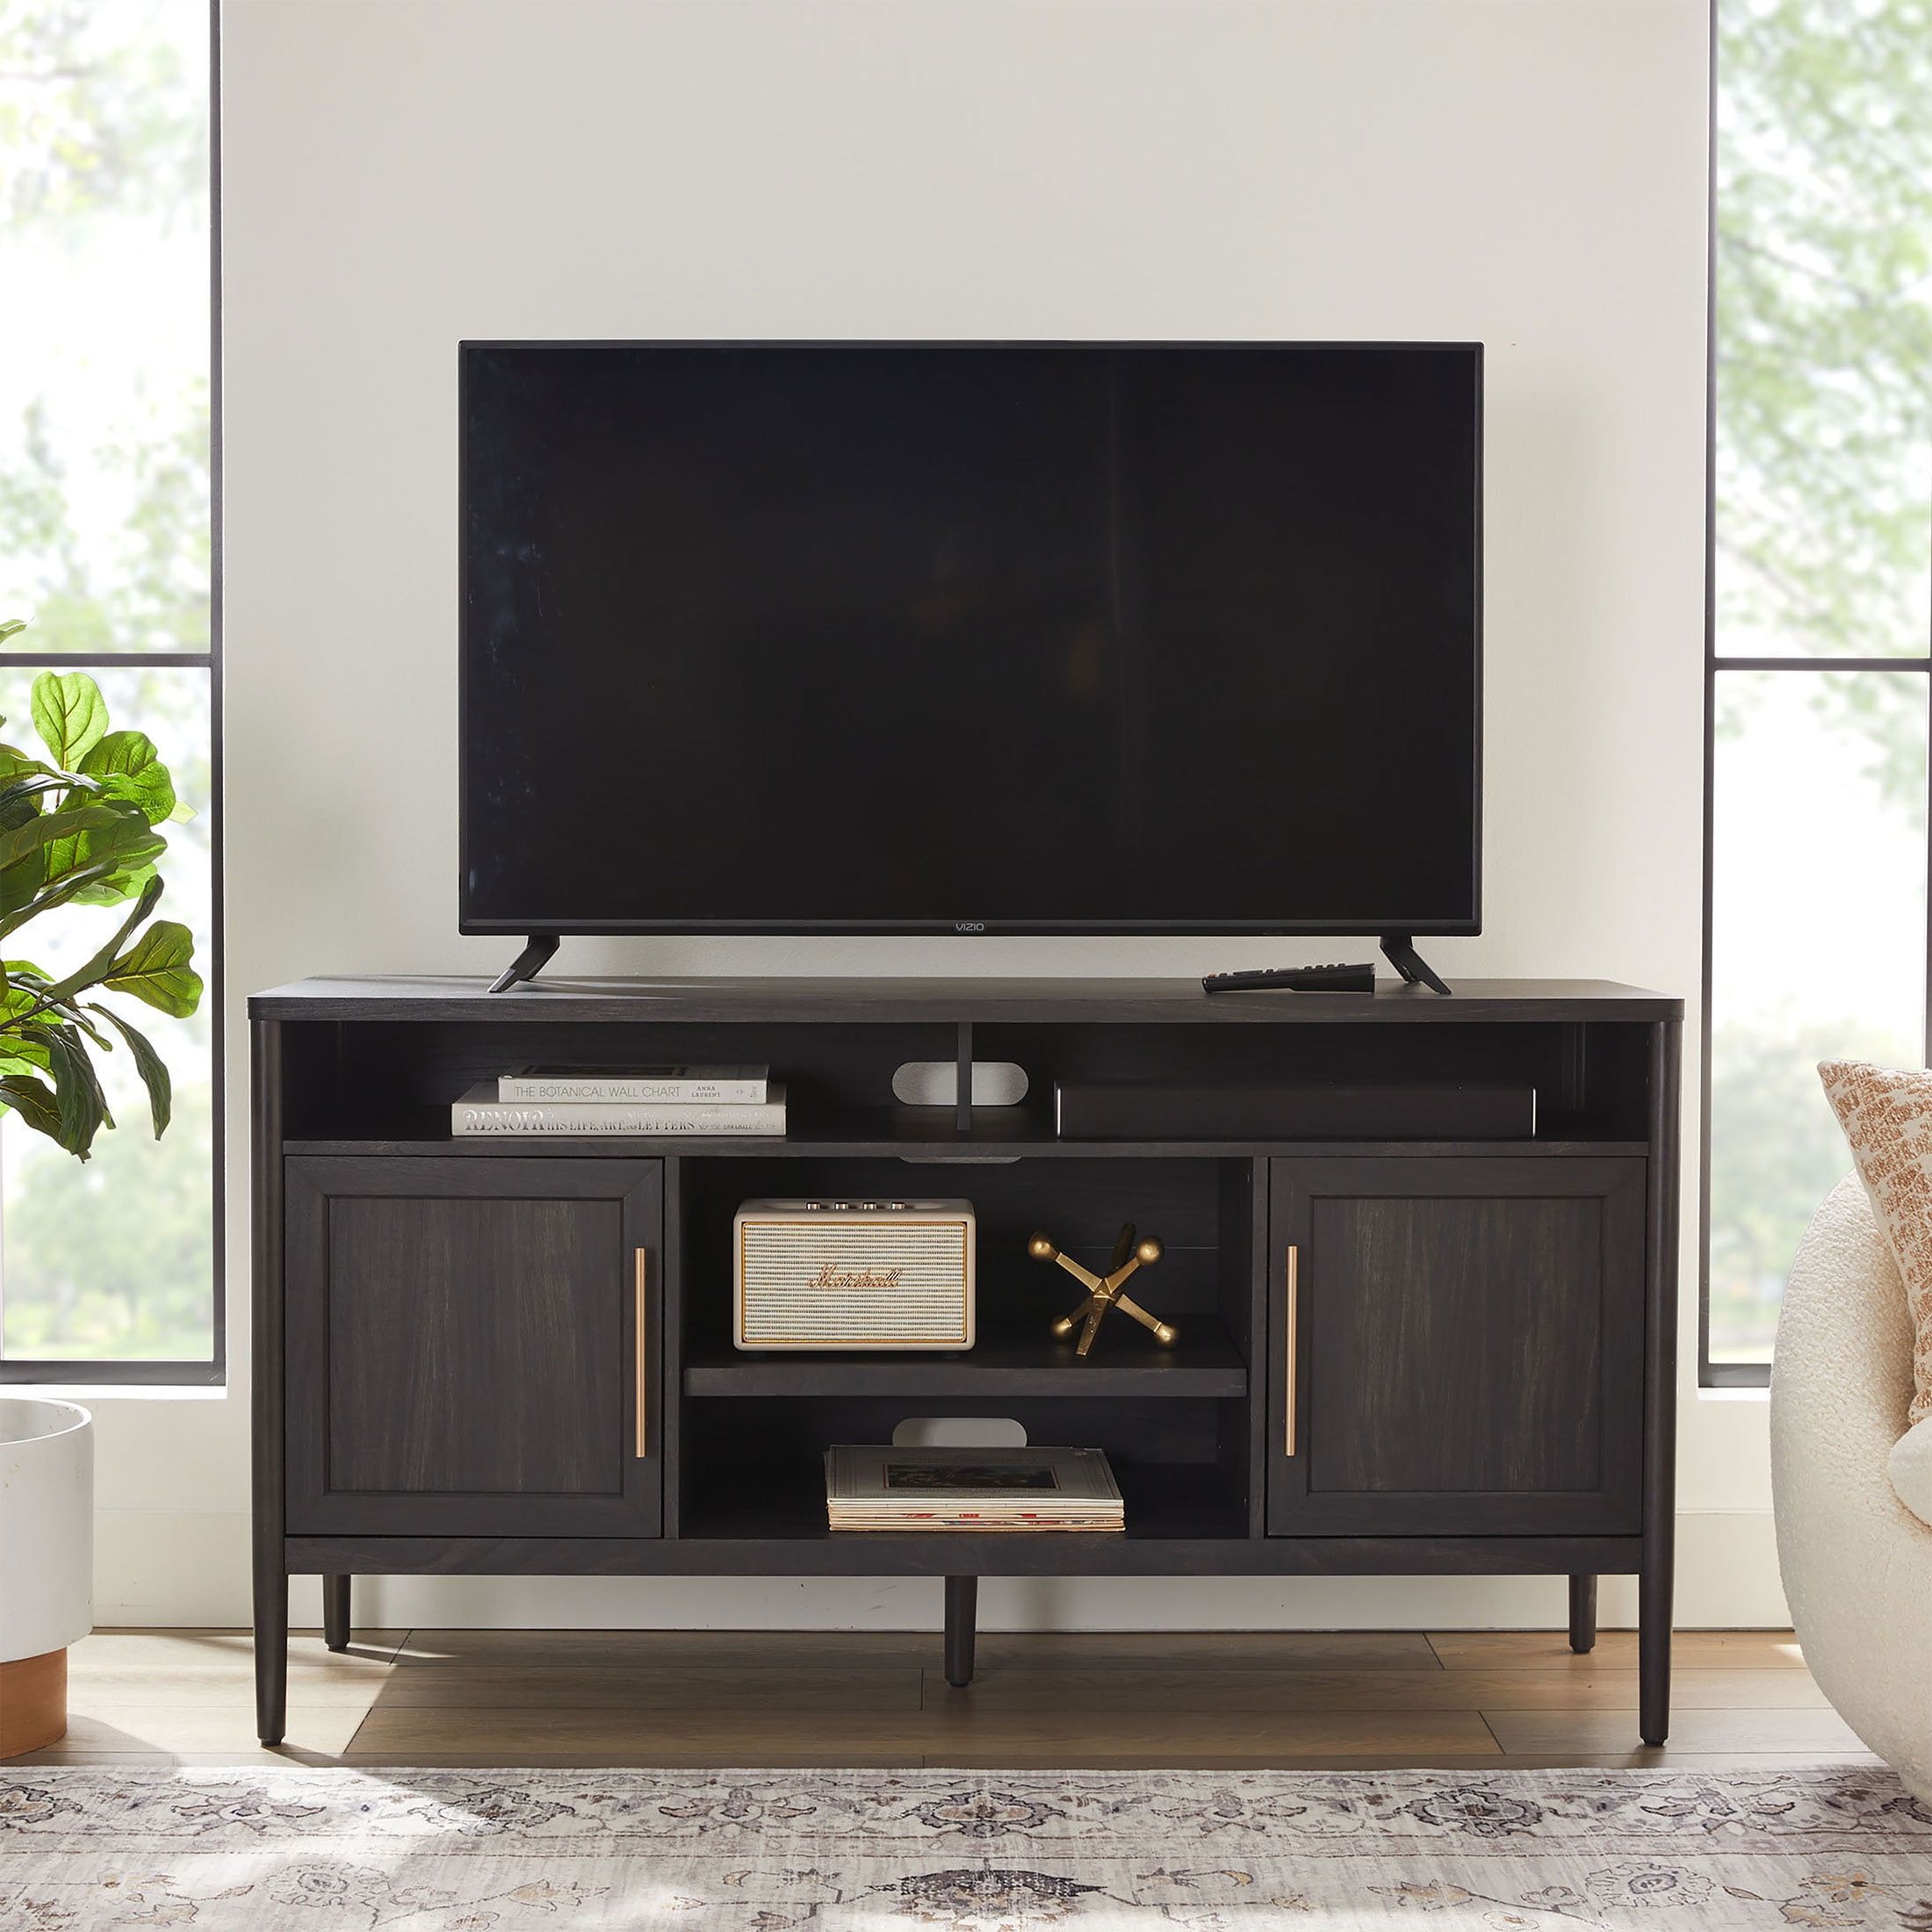 Better Homes & Gardens Oaklee Tv Stand For Tvs Up To 70”, Charcoal Pertaining To Oaklee Tv Stands (Gallery 5 of 20)